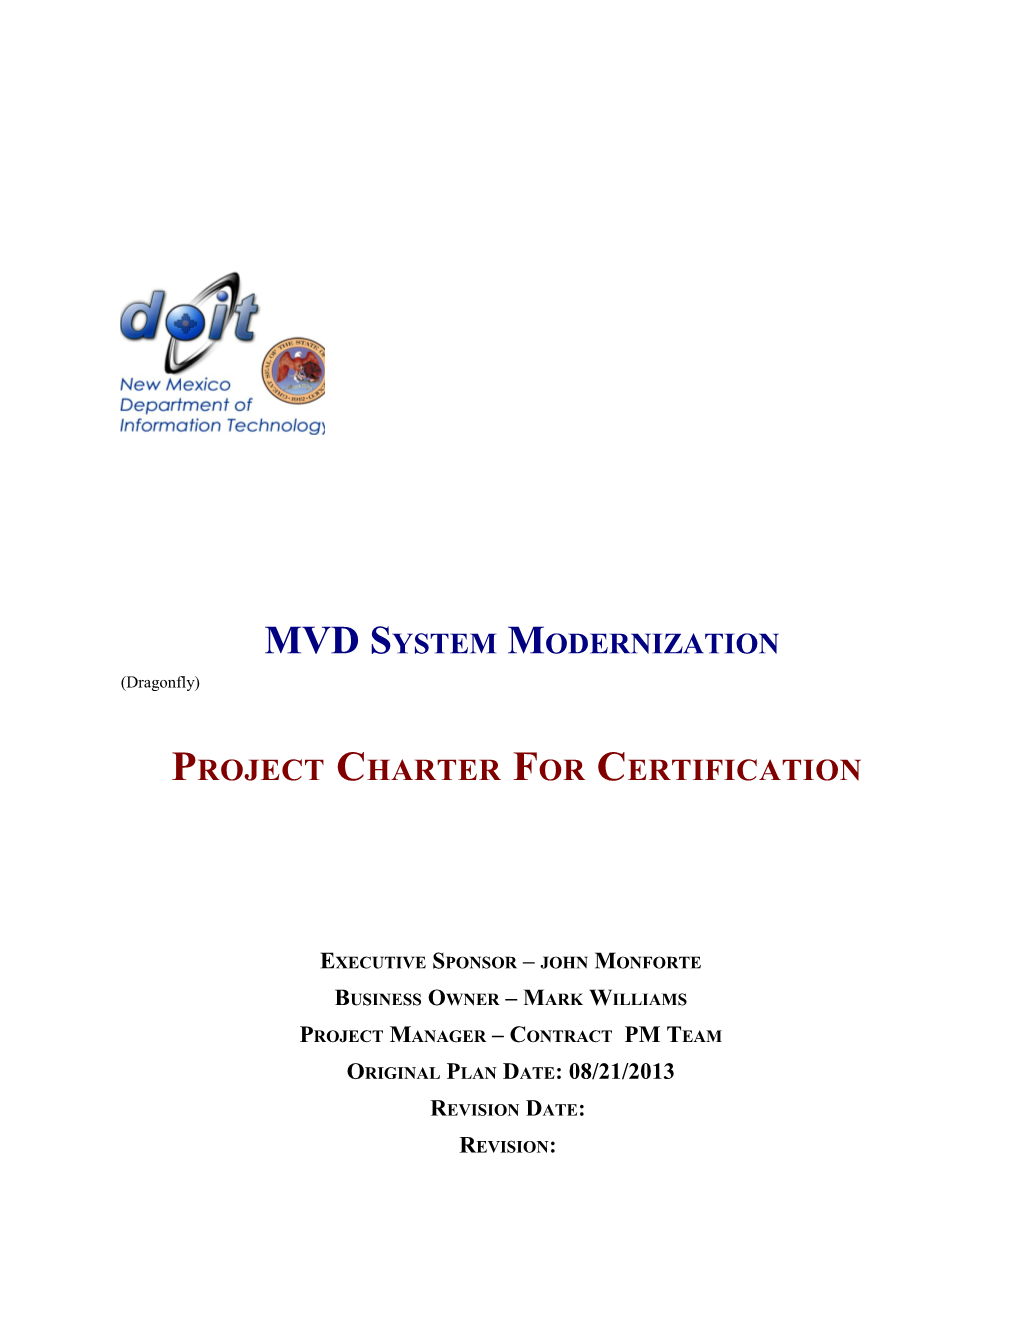 Project Charter for Certification